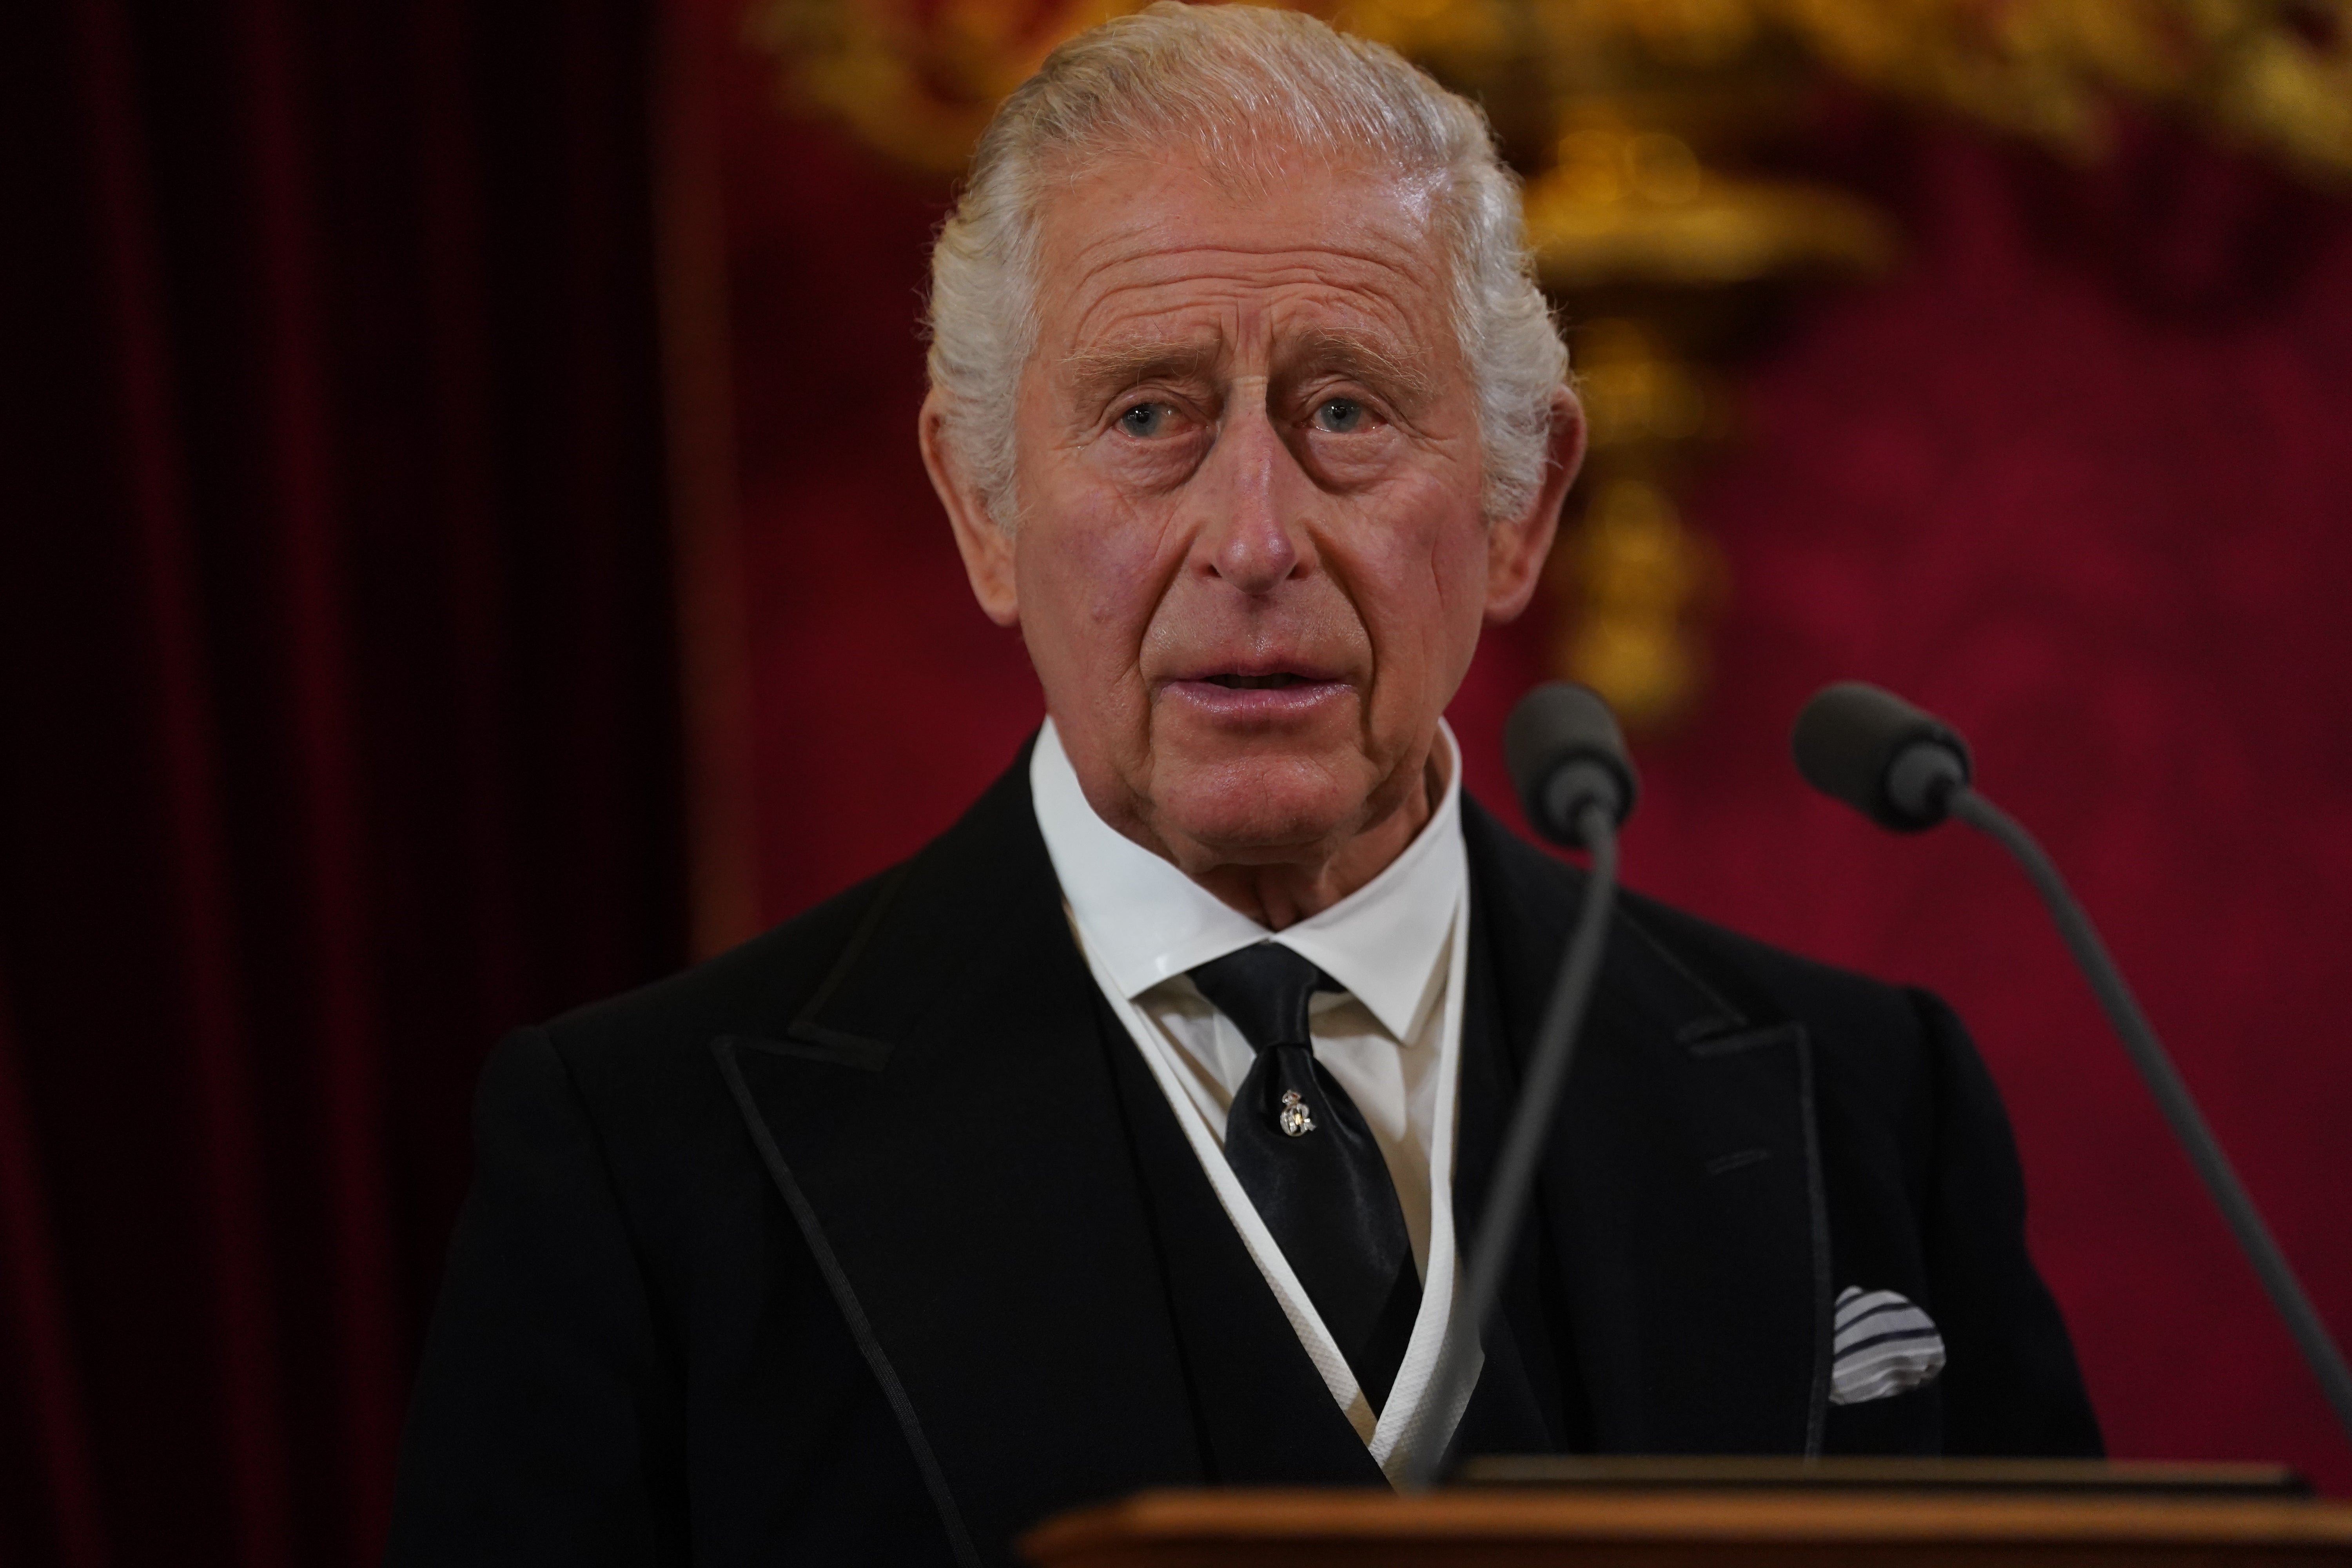 King Charles III during the Accession Council at St James’s Palace, London, where King Charles III is formally proclaimed monarch (PA)